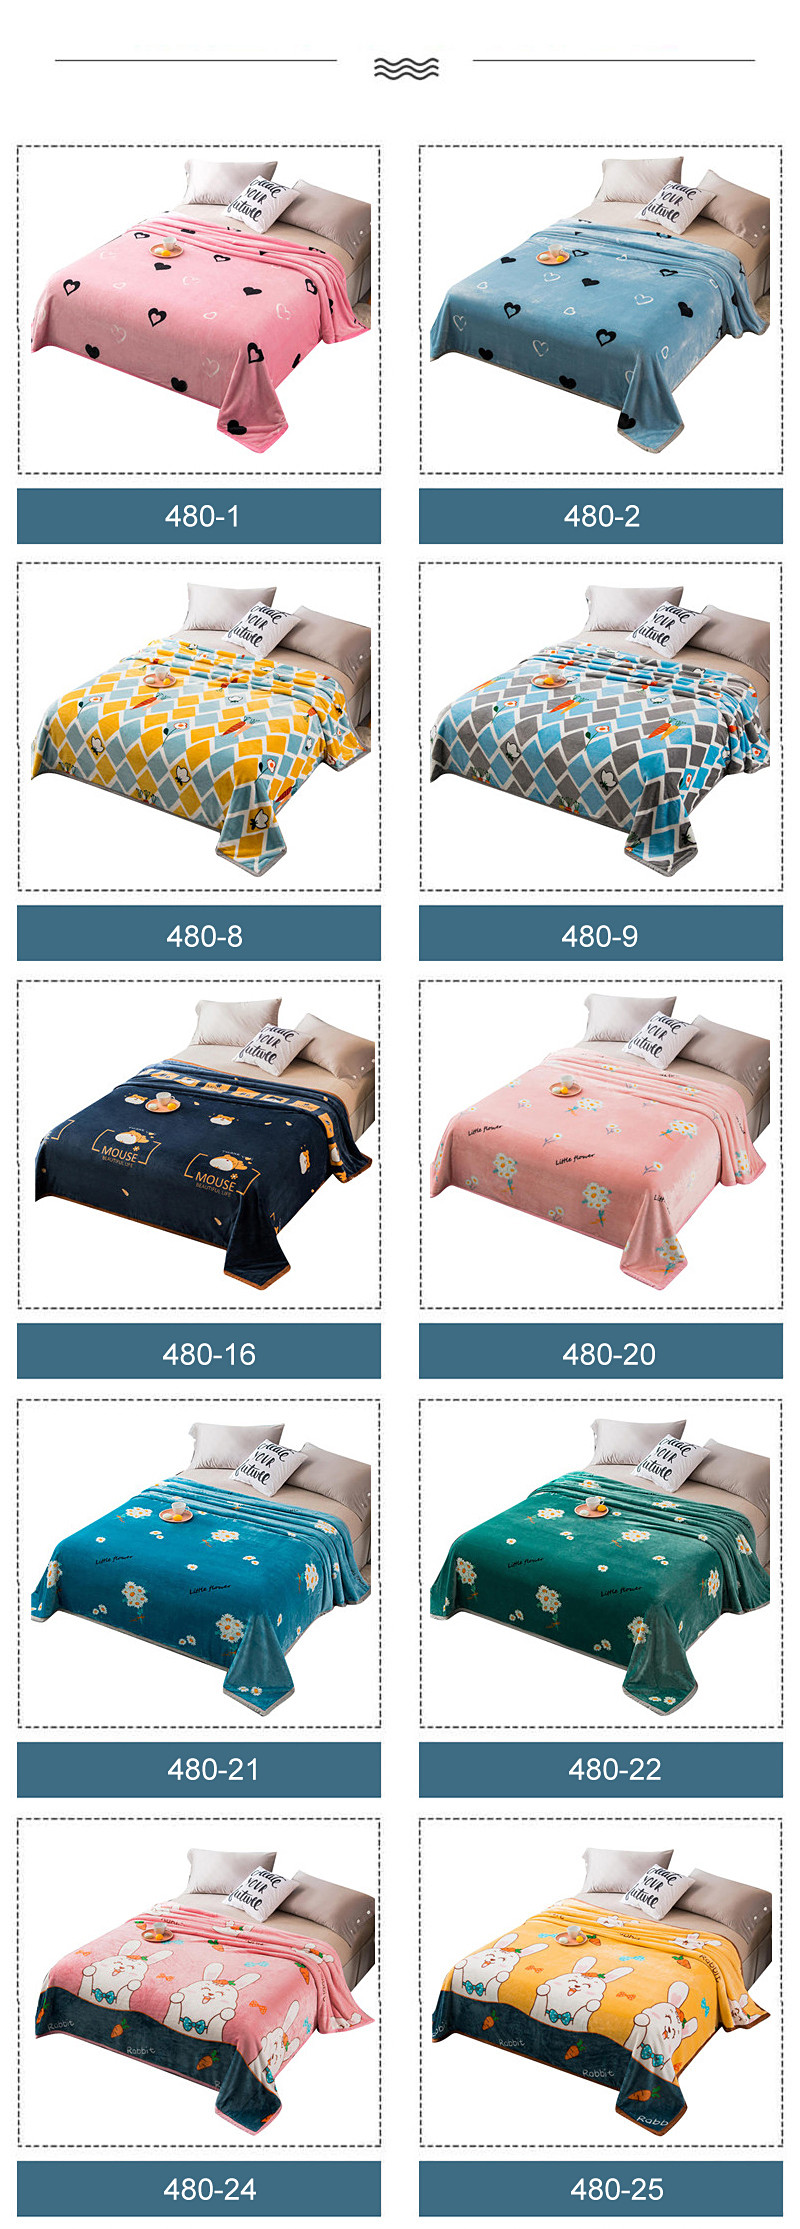 For Twin Bedding Blanket Autumn